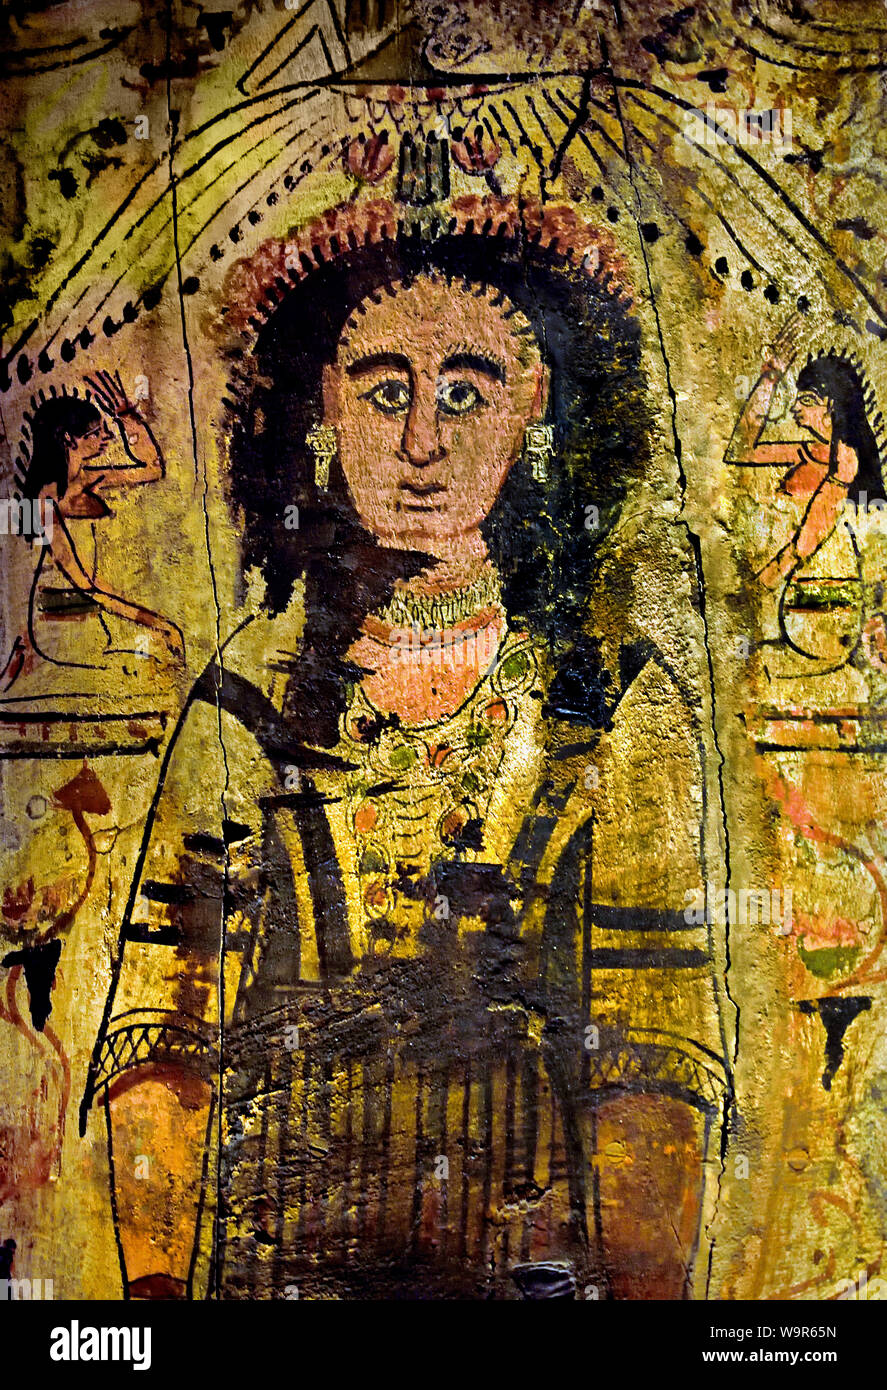 Bottom of the coffin of Chelidonia early 3rd century AD Thebes  (Tamarind wood painted with tempera Thebes tombs) Egypt Egyptian , In Roman times, the ancient Thebes no longer exists: the city of Diospolis Magna (Louqsor) extends on the east bank of the Nile while the west bank (Memnonia) now depends on the city of Hermonthis (Armant ). The long-established funerary tradition for the Egyptian elite is better maintained here than elsewhere, by the care given to mummification, the skilful integration of ancient iconography and the use of cartonnage techniques, especially in stuccoed linen. Stock Photo